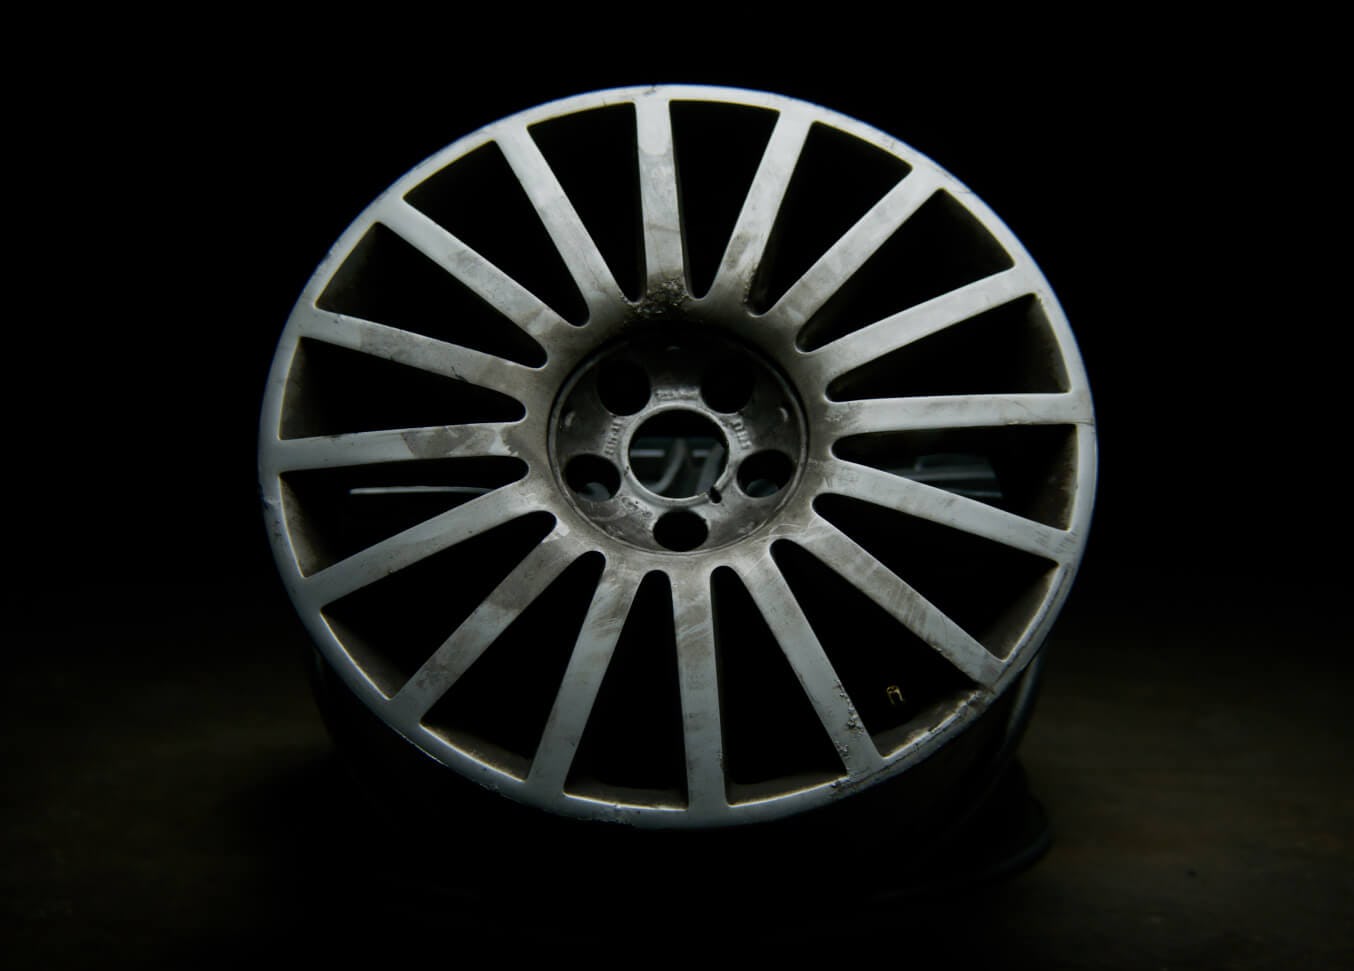 Damaged silver alloy wheel with the powder coating flaking